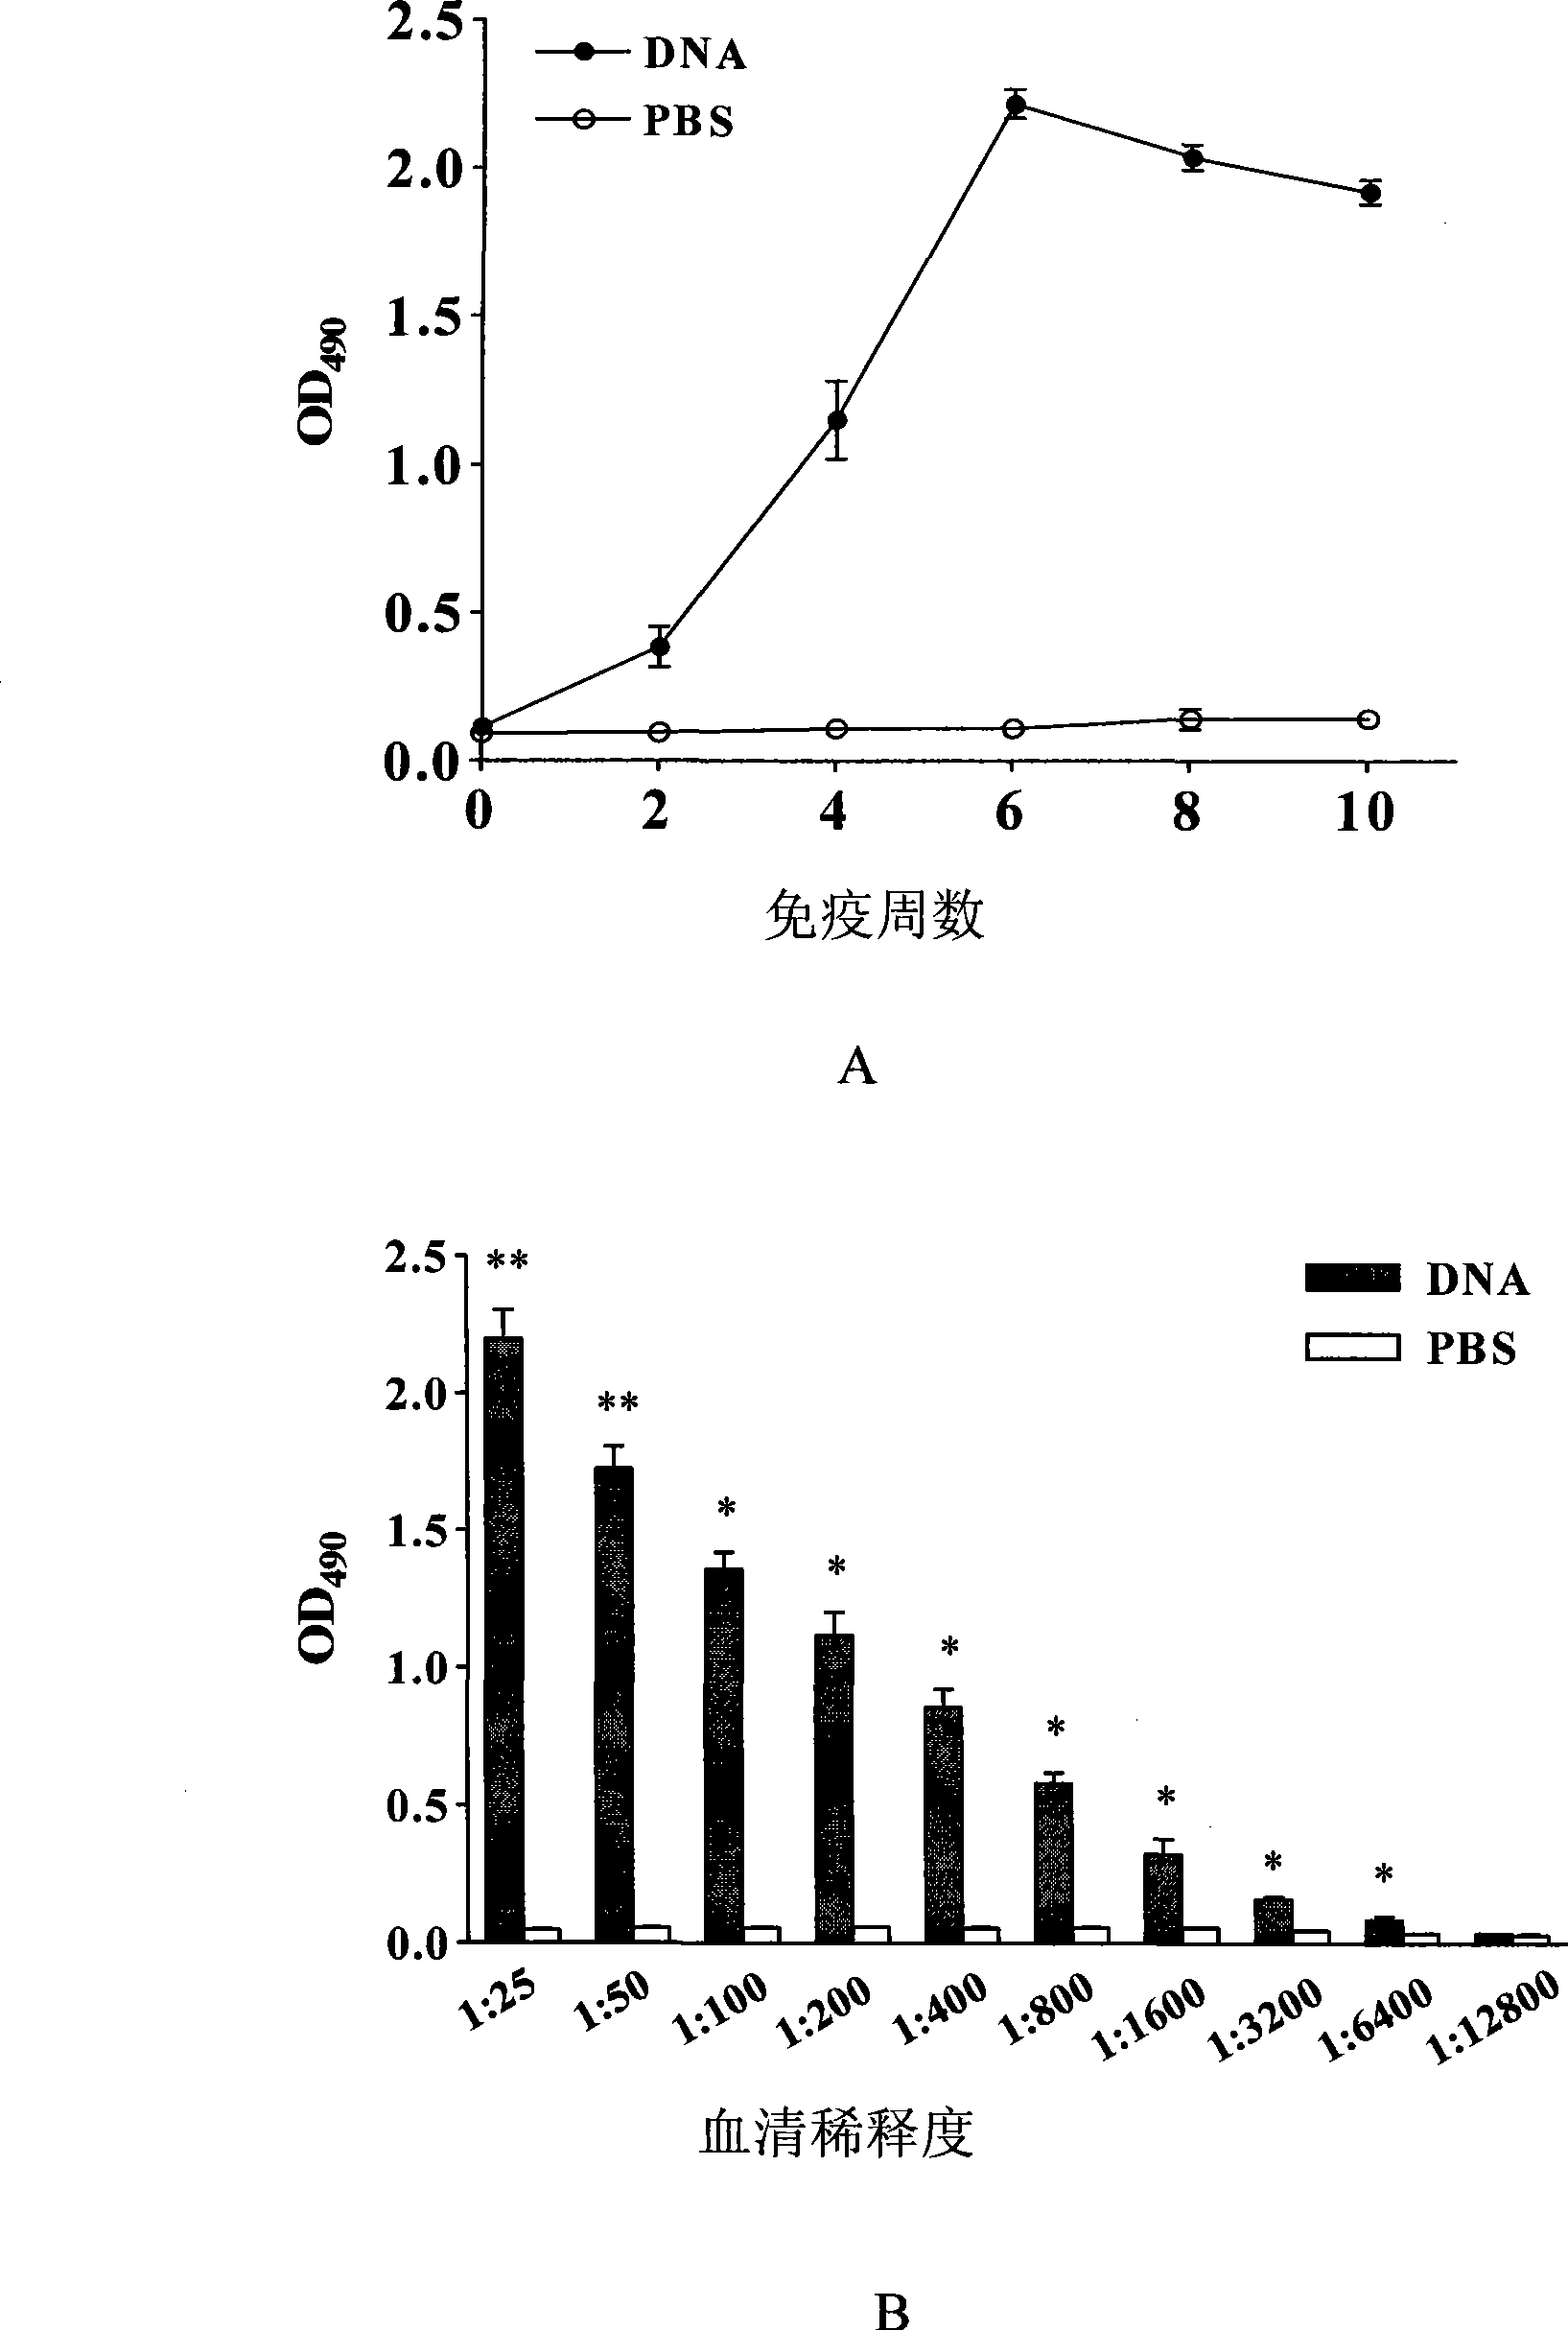 Anti-double-chain DNA monoclone antibody with antineoplastic activity and preparation method thereof